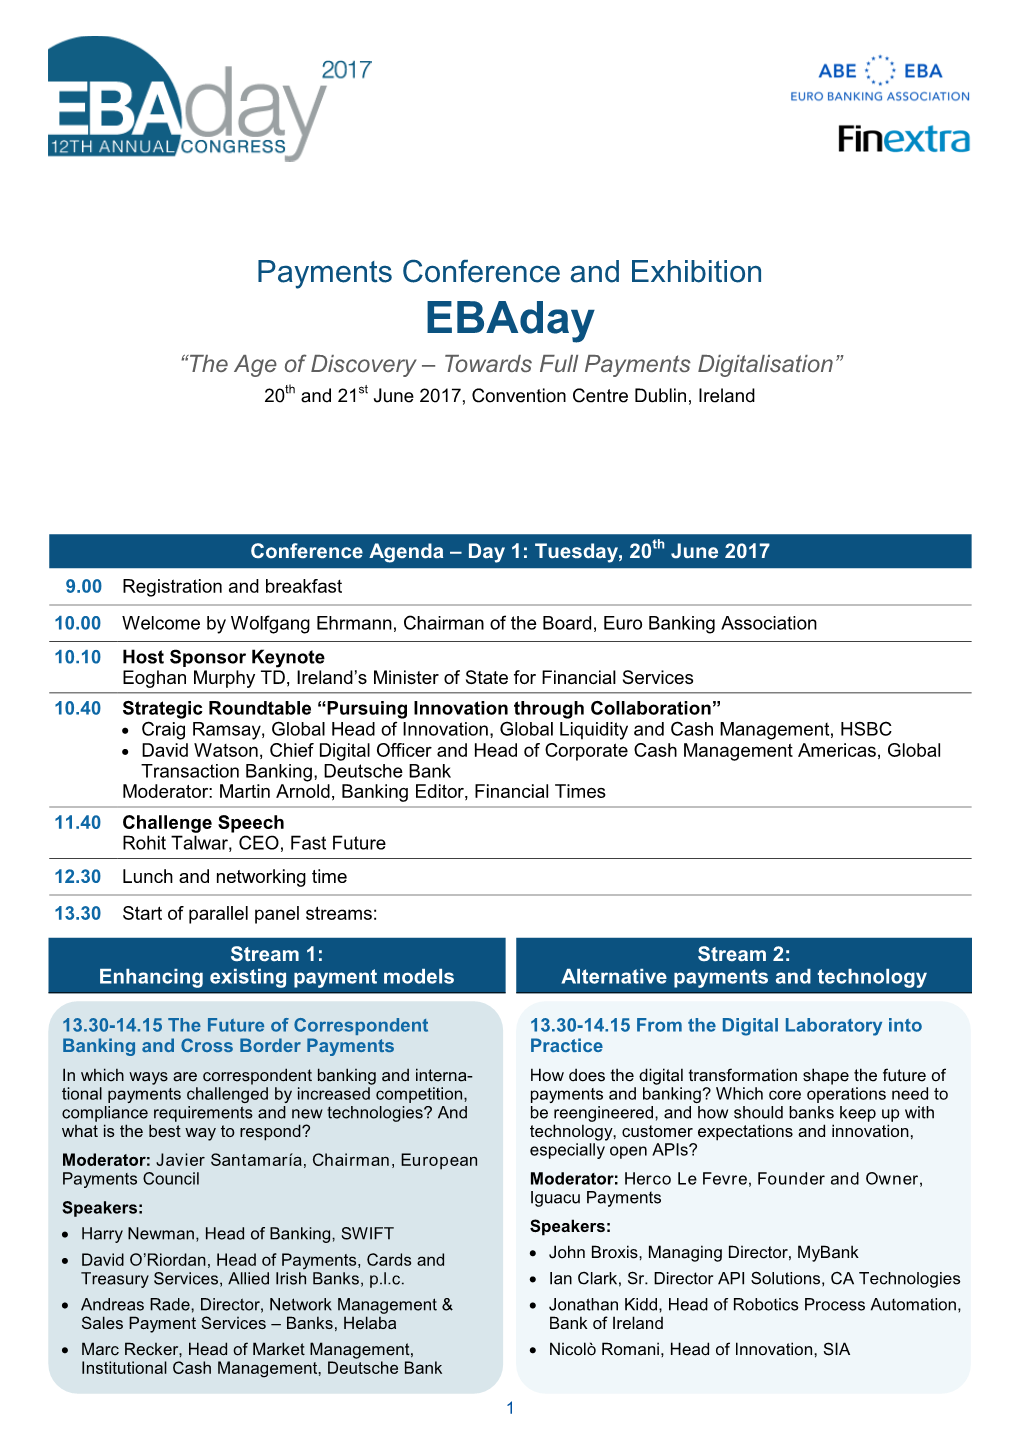 Ebaday “The Age of Discovery – Towards Full Payments Digitalisation” 20Th and 21St June 2017, Convention Centre Dublin, Ireland